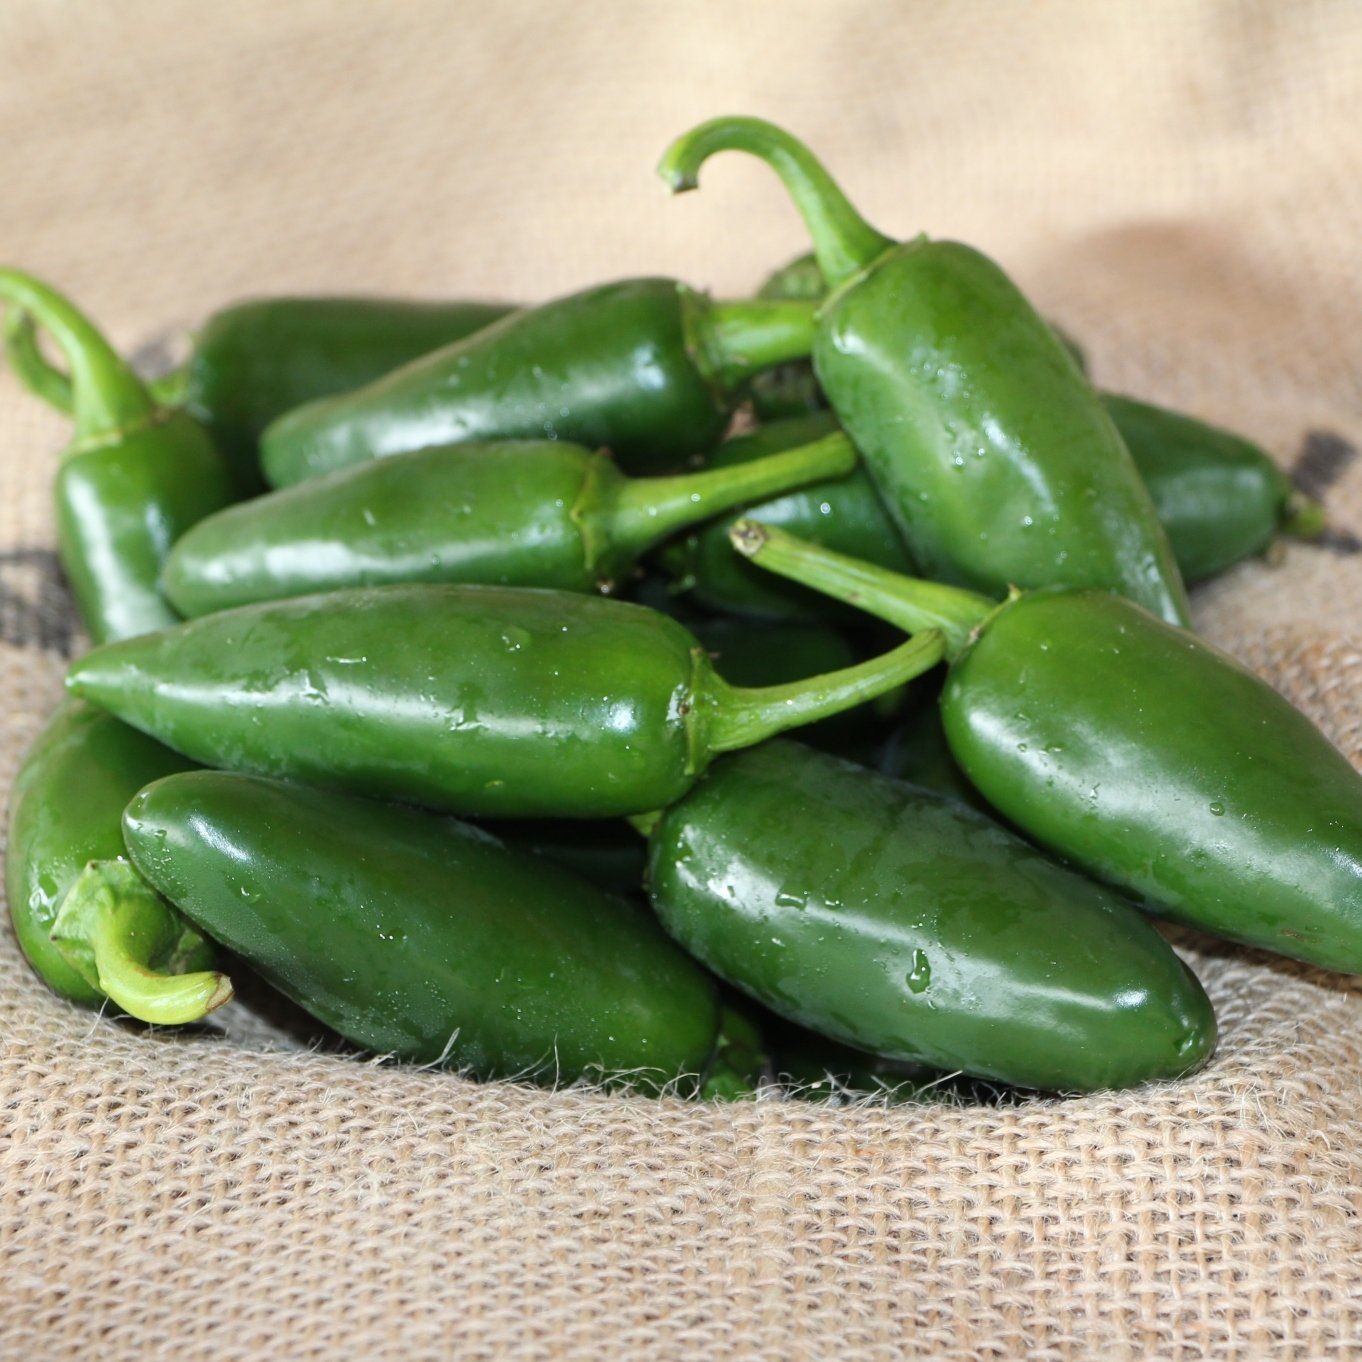 locally grown jalapeno peppers